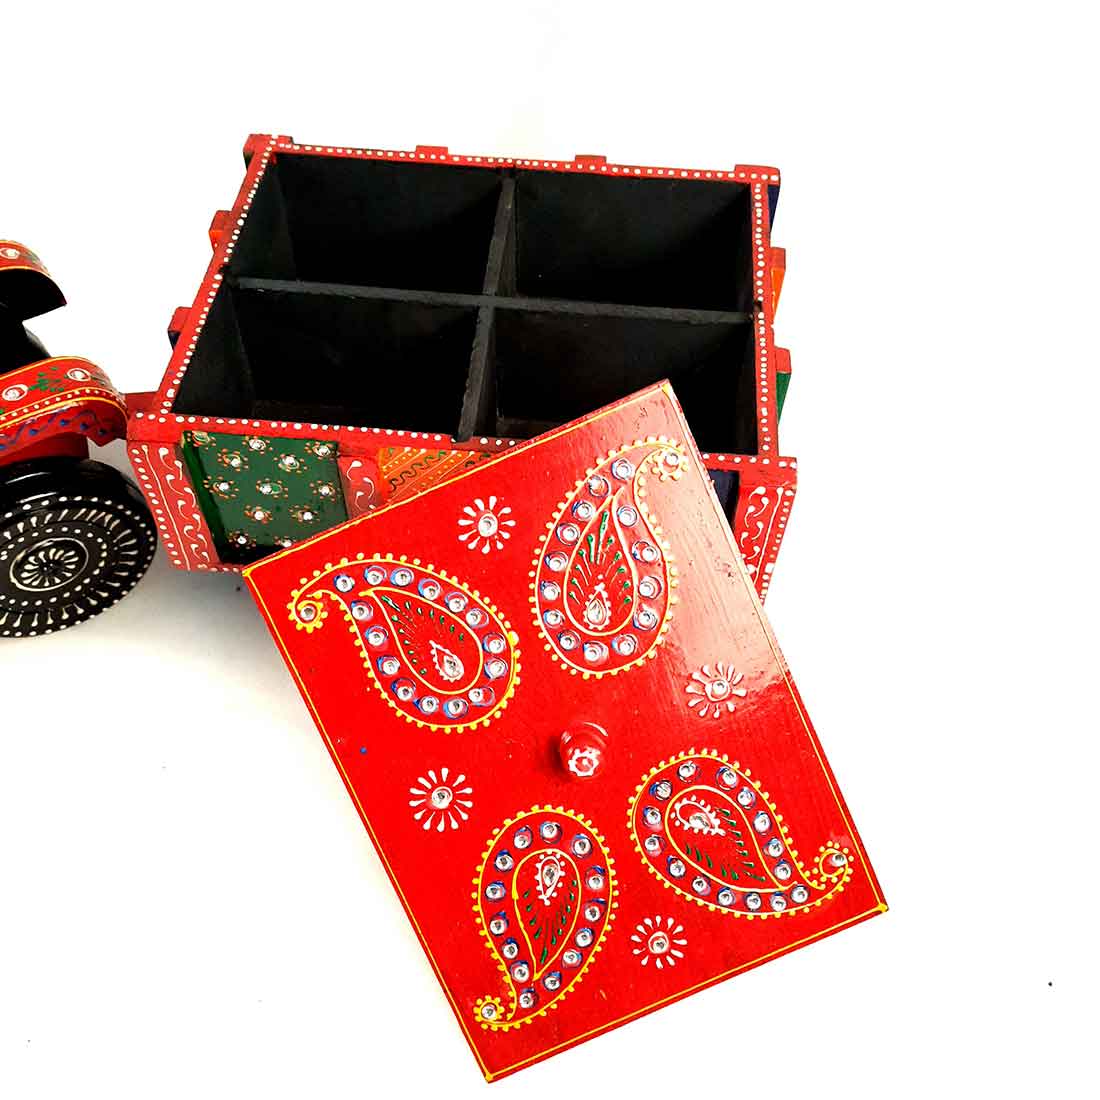 Dry Fruit Box with Lid  - Tractor Design - For Serving & Dining Table Decor - 22 Inch - ApkaMart